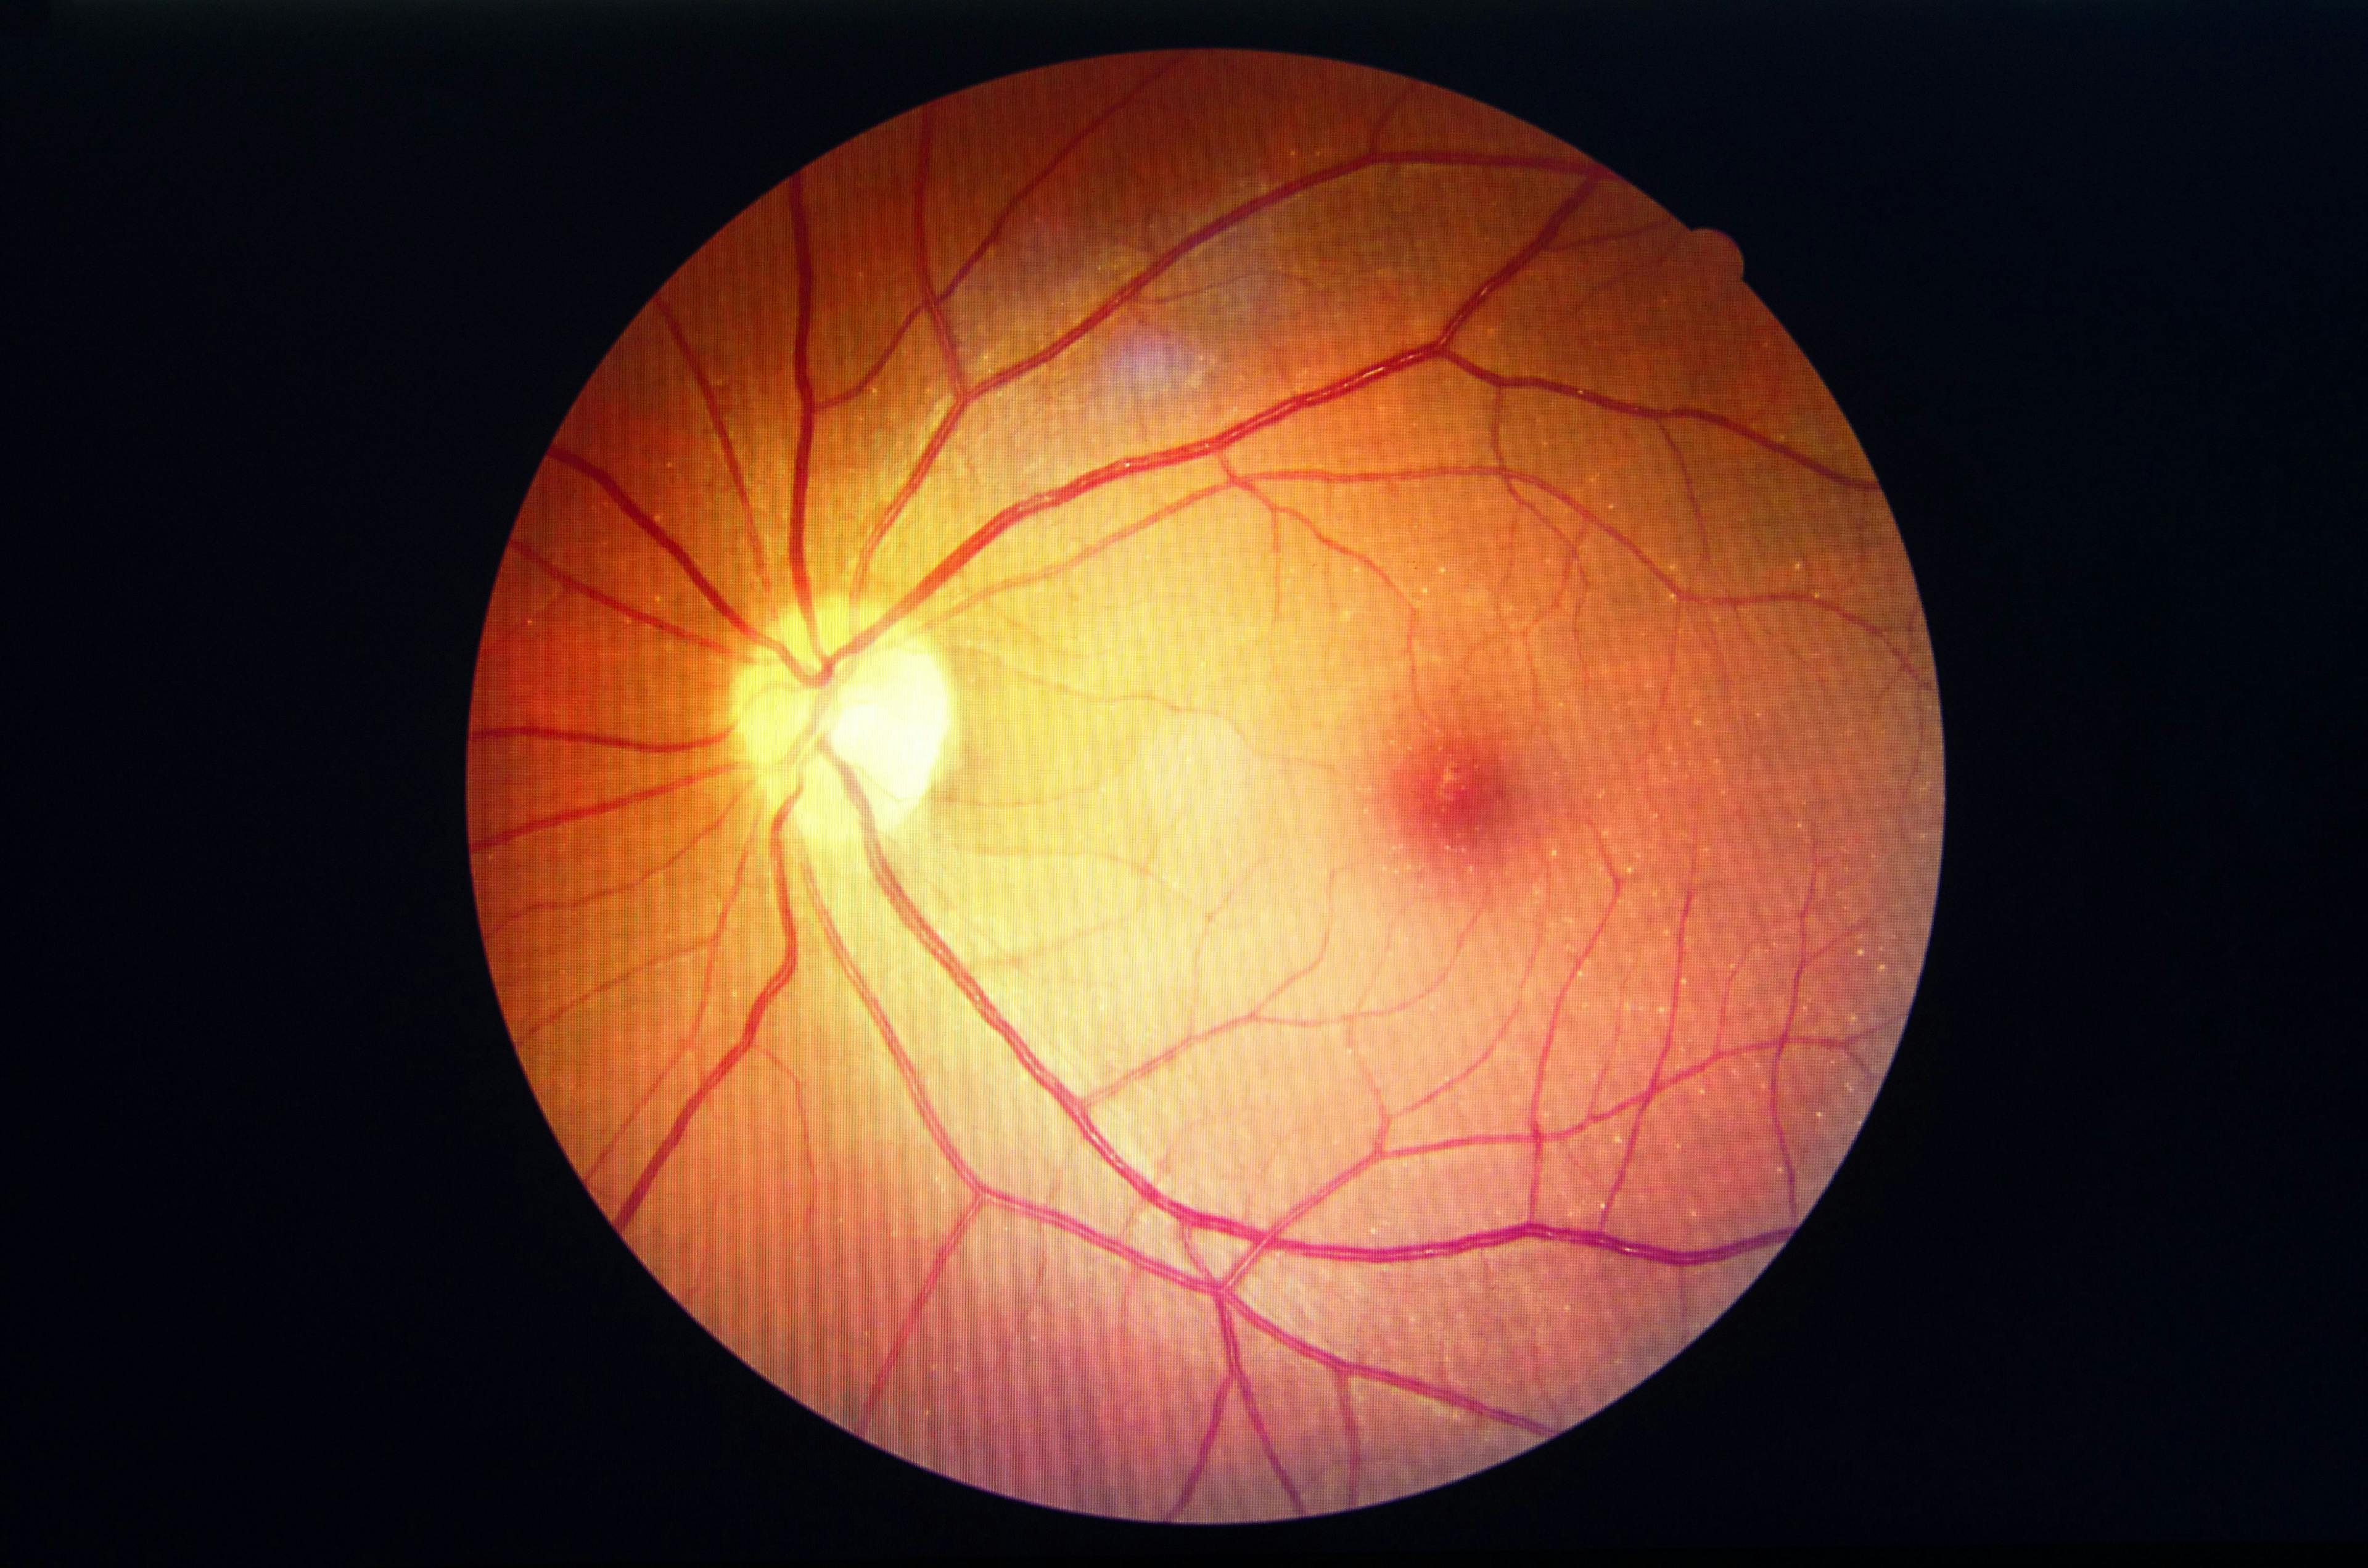 Retinopathy in Systemic Lupus Increases with Longer Hydroxychloroquine Use